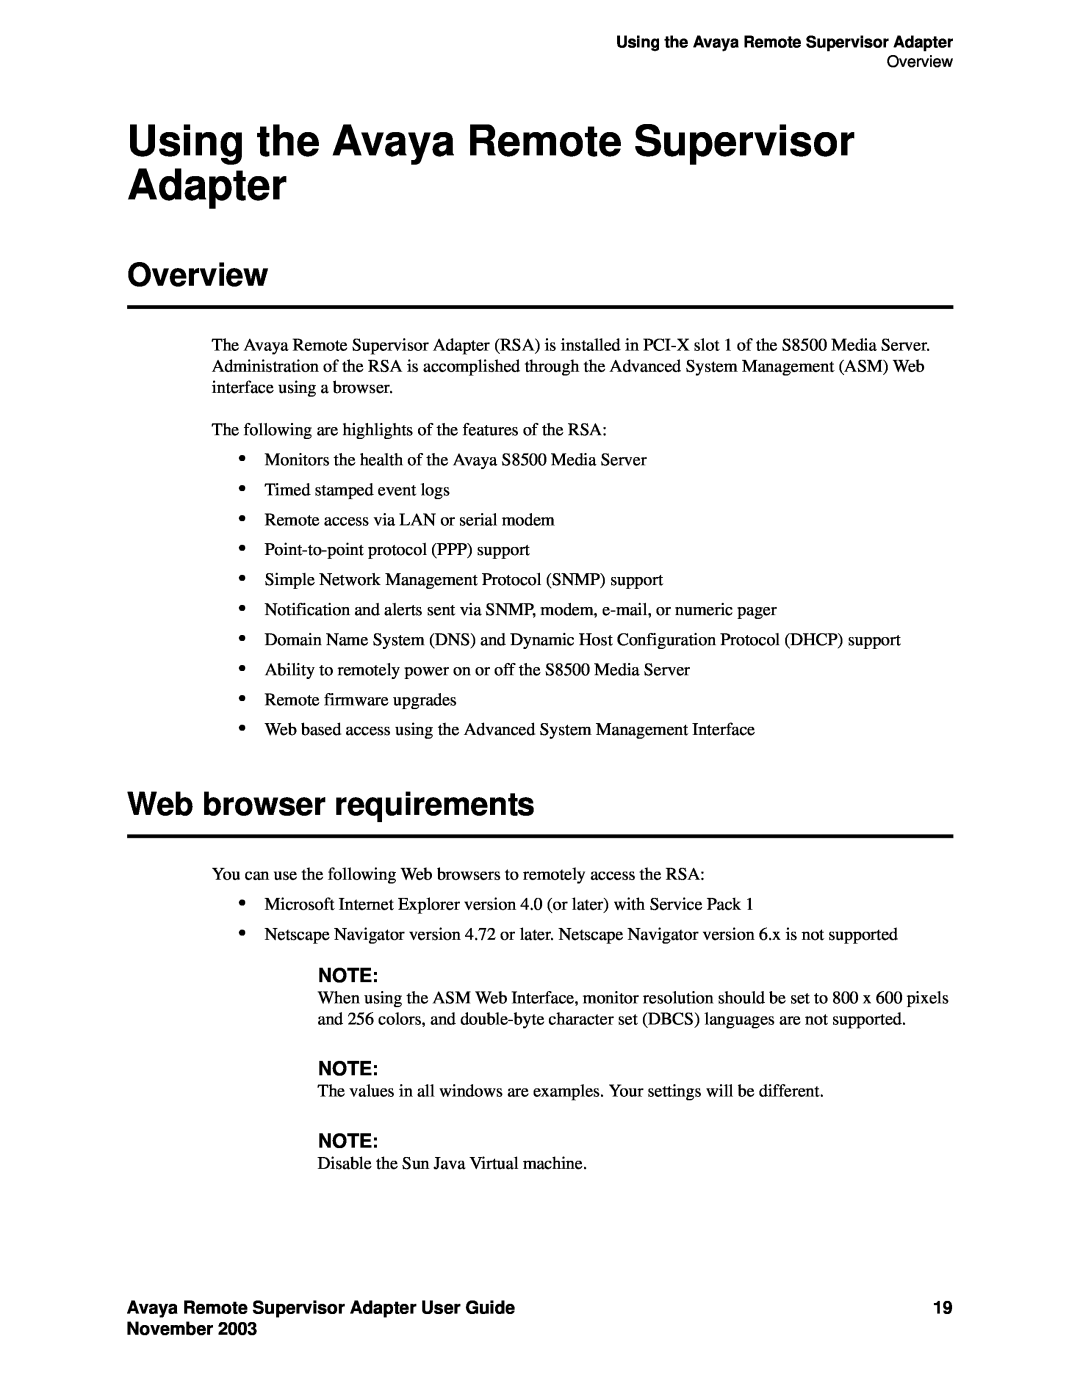 Avaya S8500 manual Using the Avaya Remote Supervisor Adapter, Web browser requirements, Overview, November 